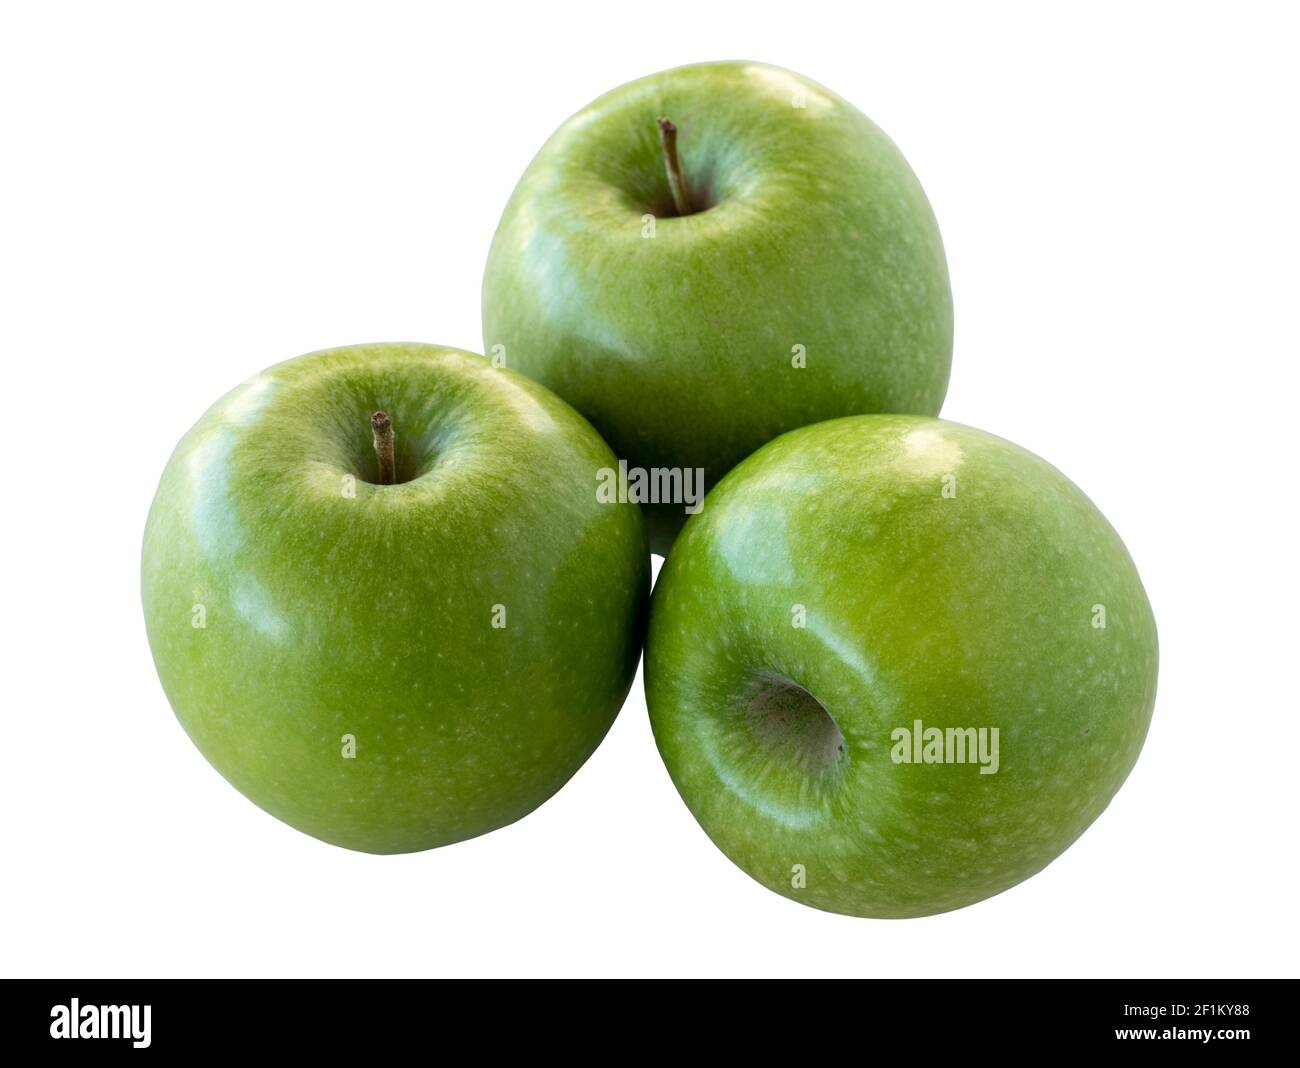 Green sour apple isolated on white background Stock Photo